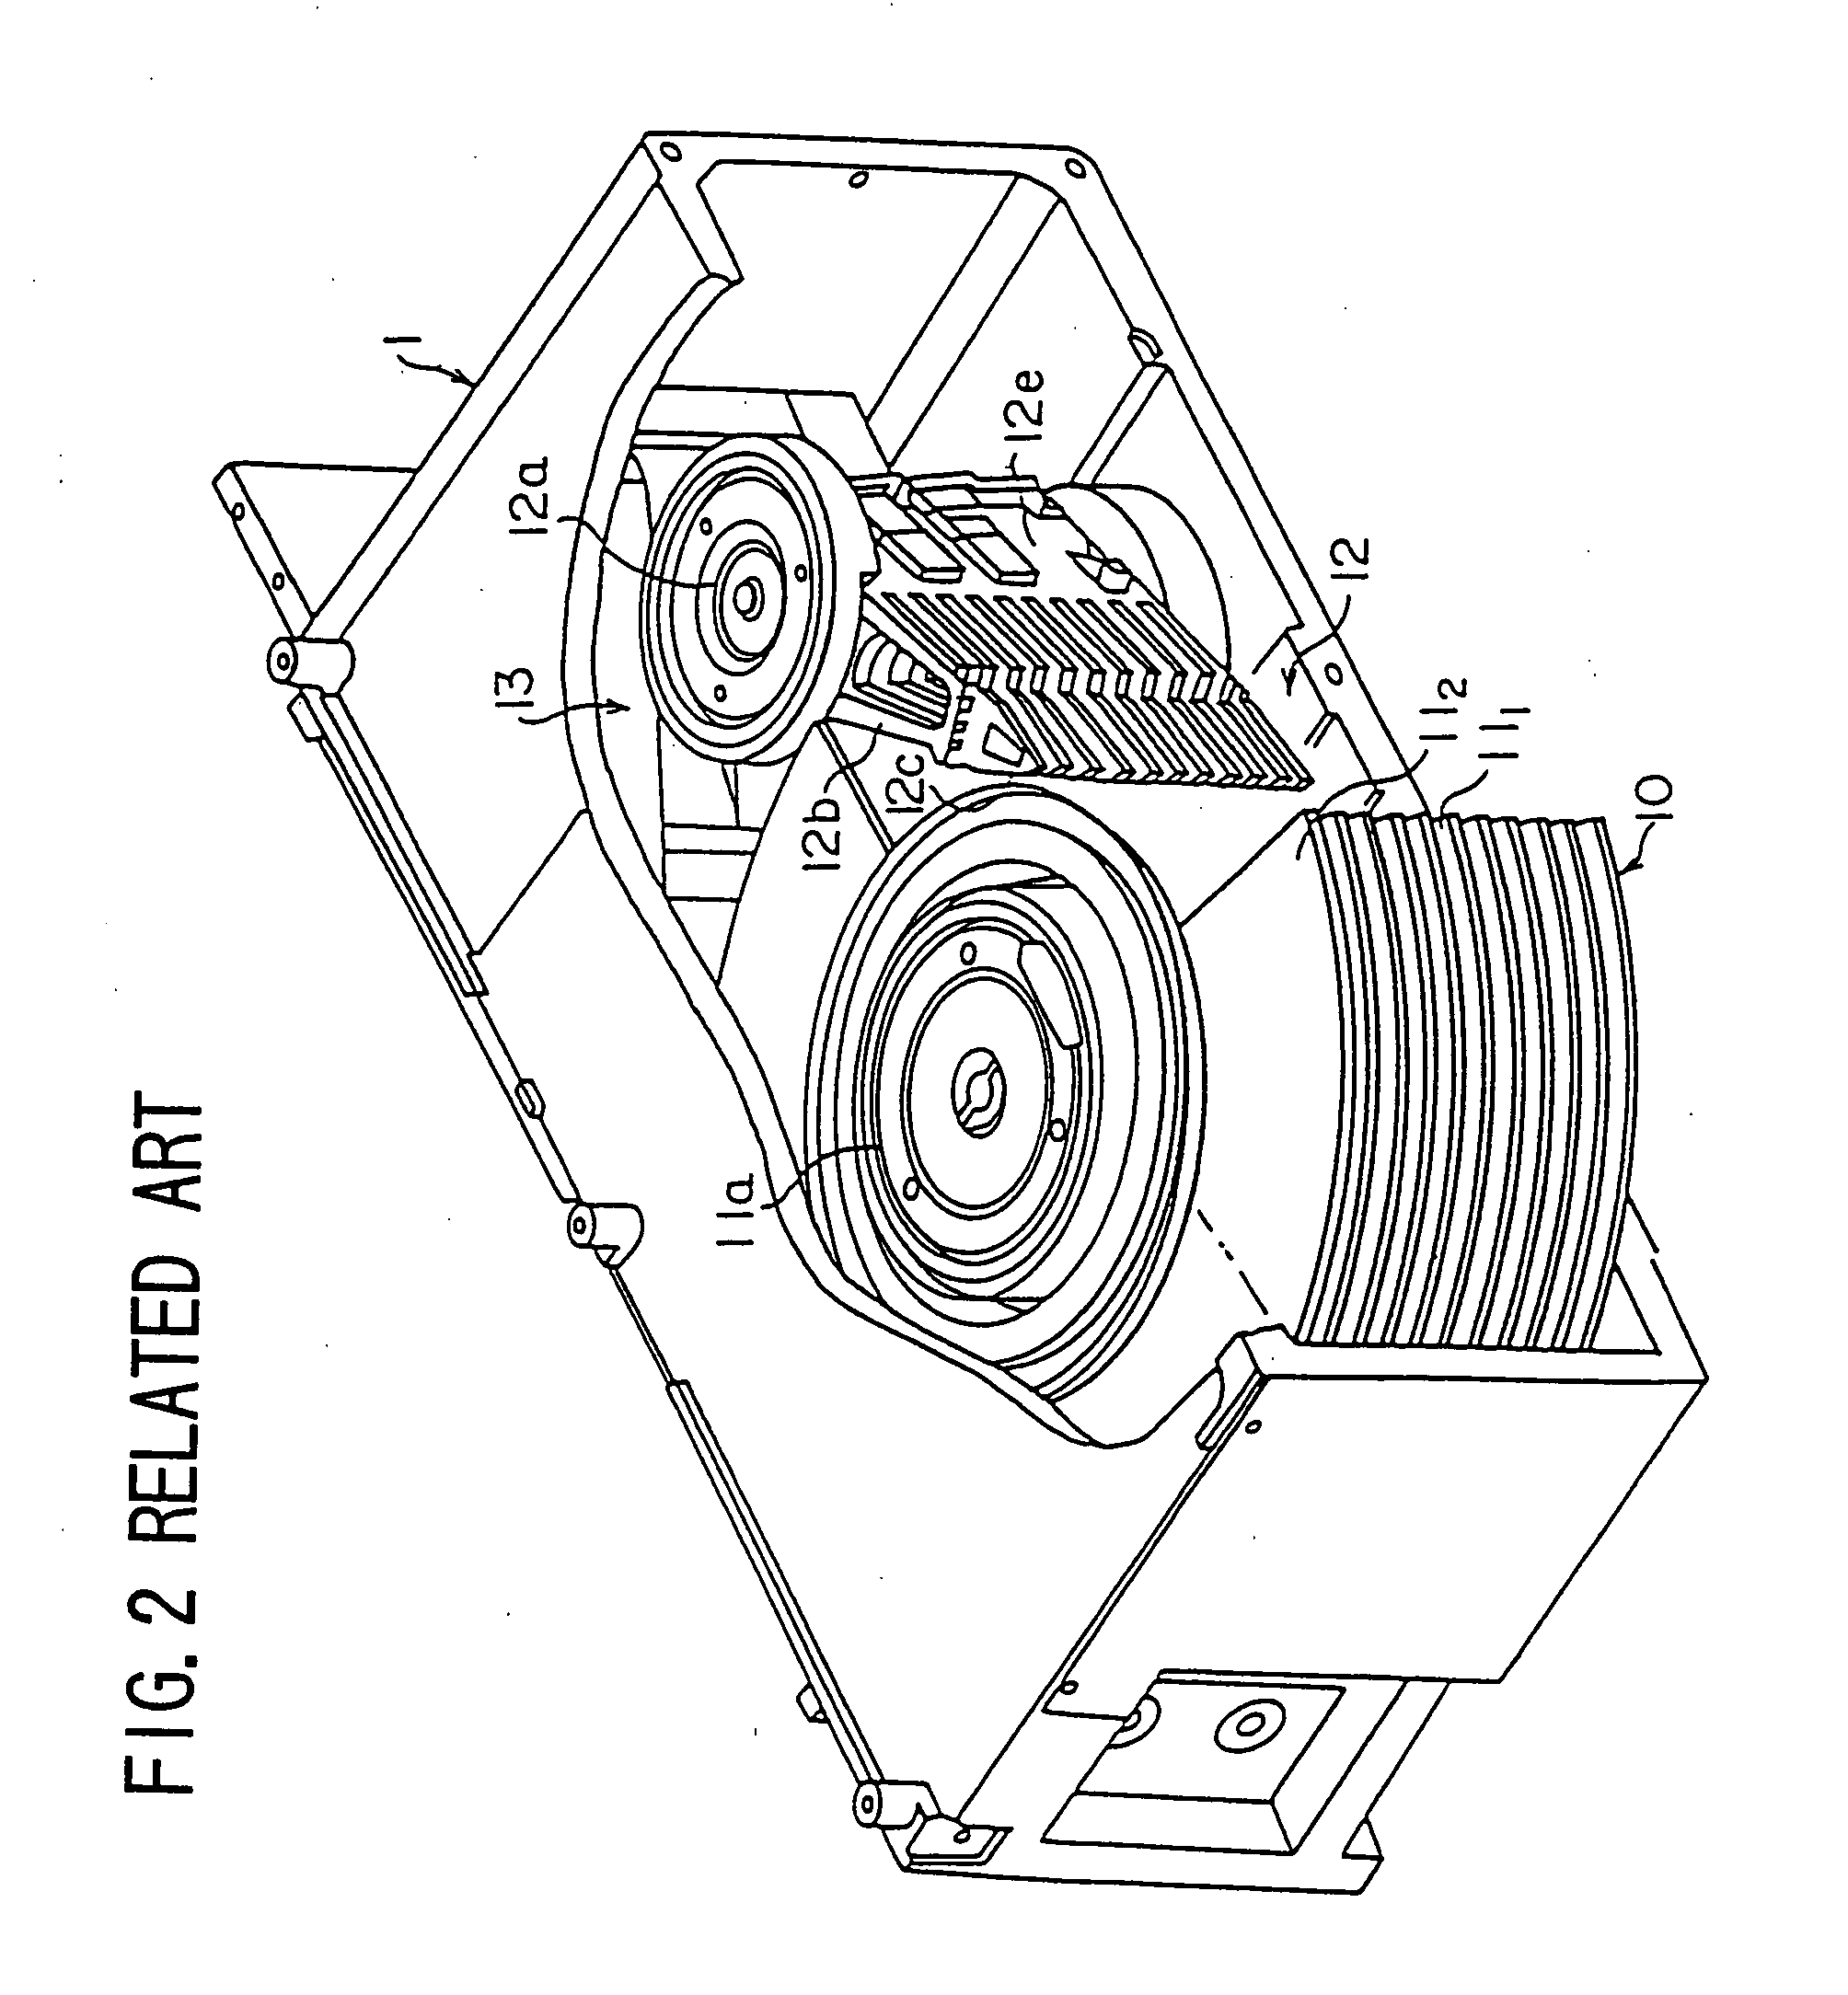 Magnetic disk drive having a surface coating on a magnetic disk